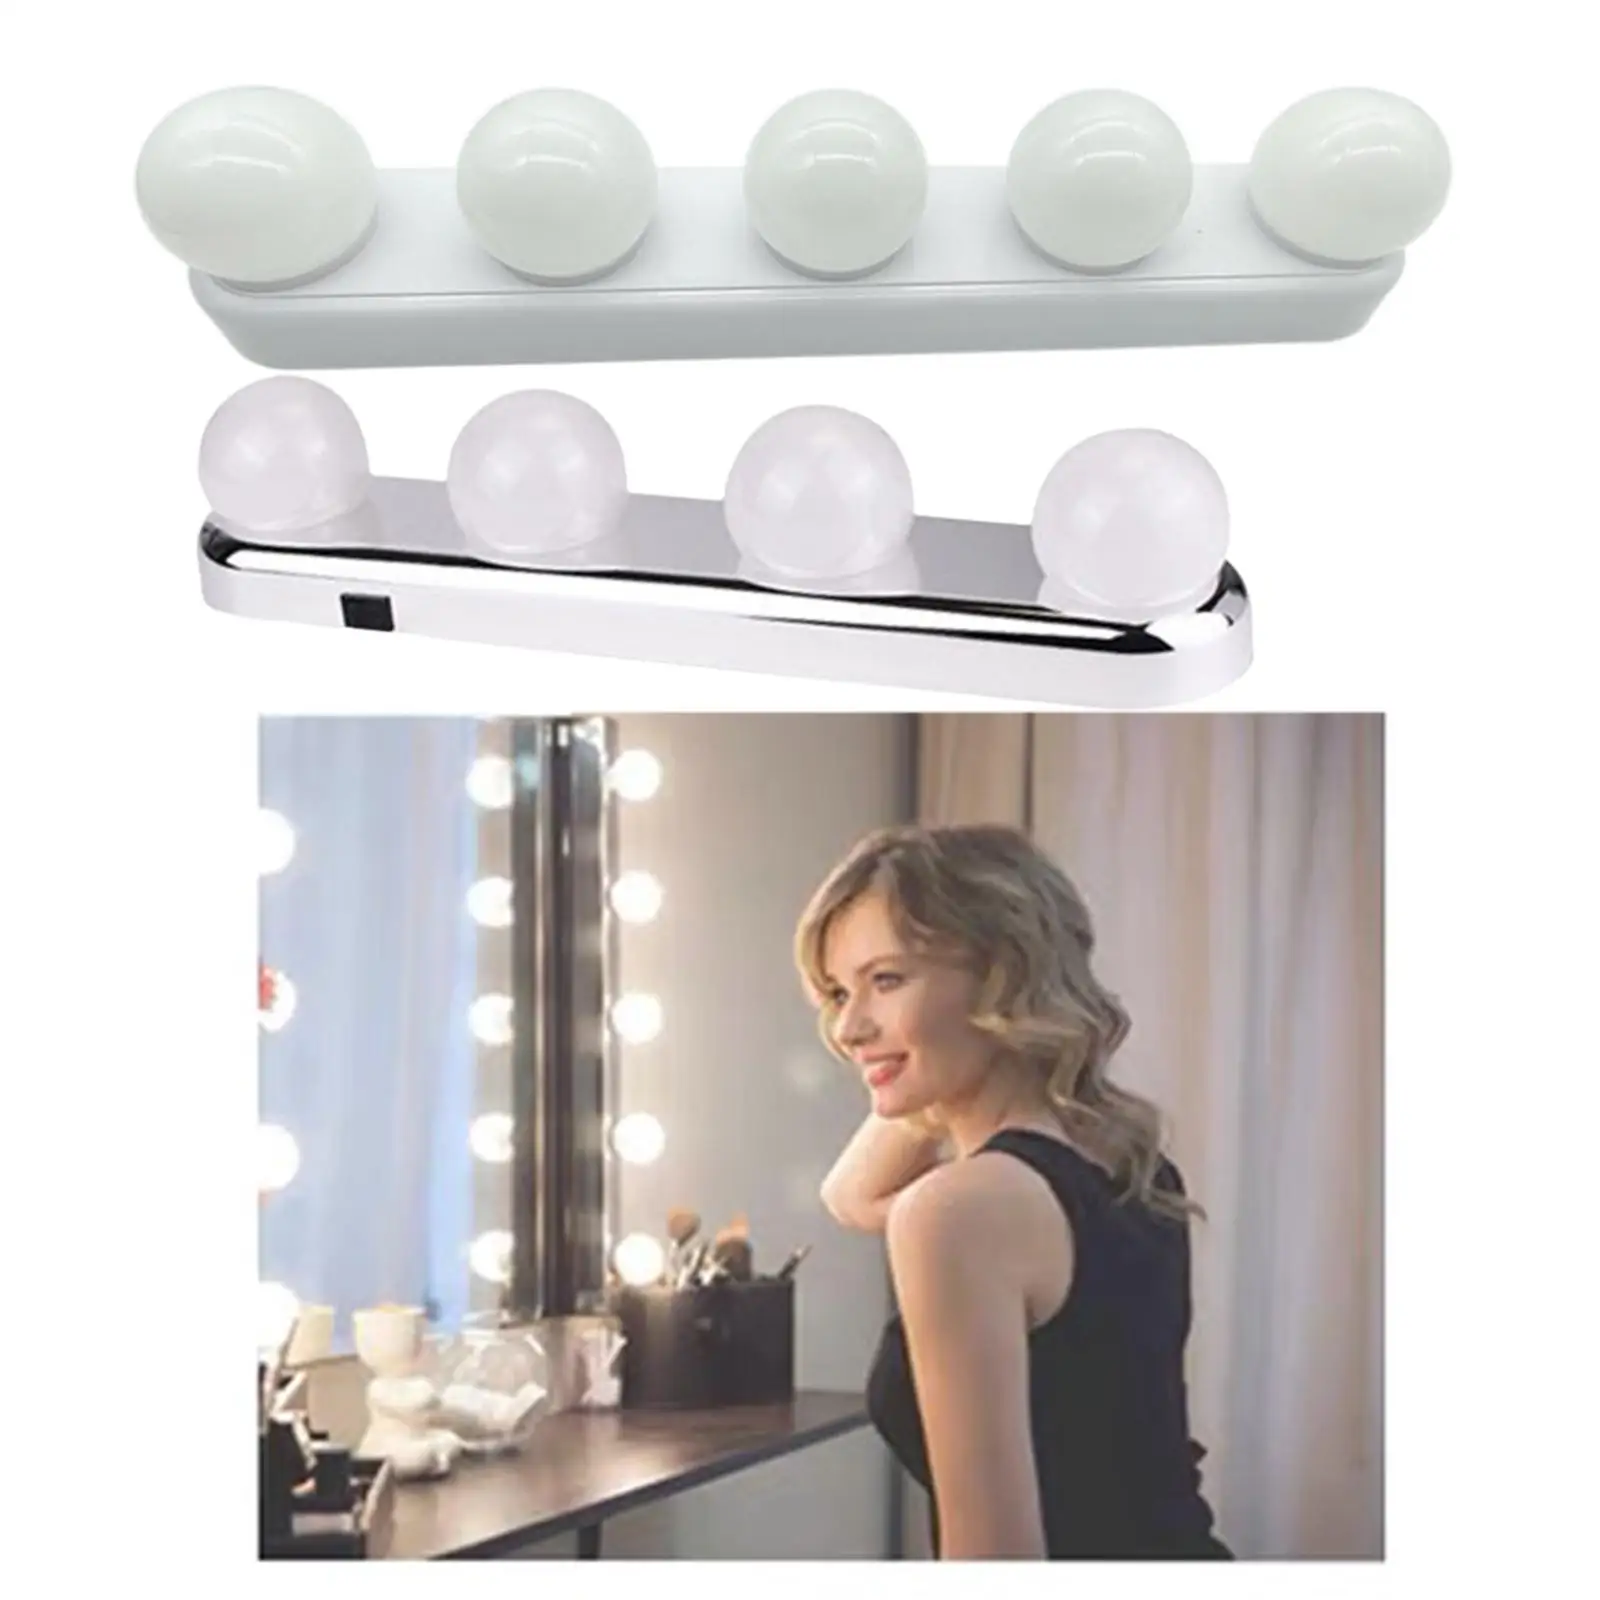 LED Makeup Mirror Light Headlight Warm White Bright Wall Lamp for Bathroom Dressing Table Beauty Mirror Fashion Show Cabinet